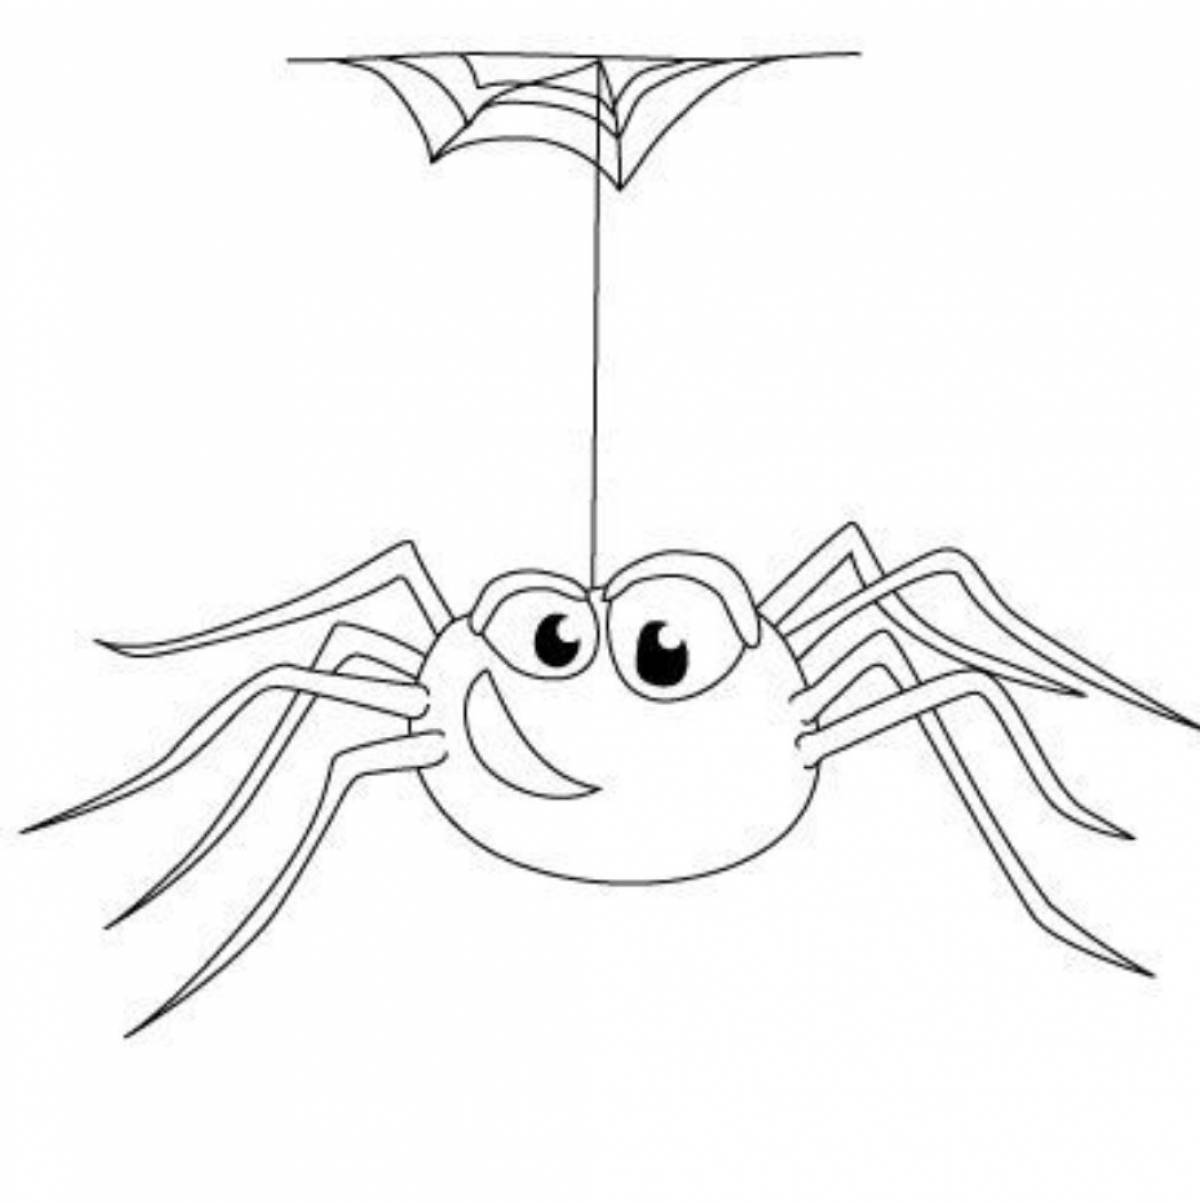 Attractive spider coloring page for students